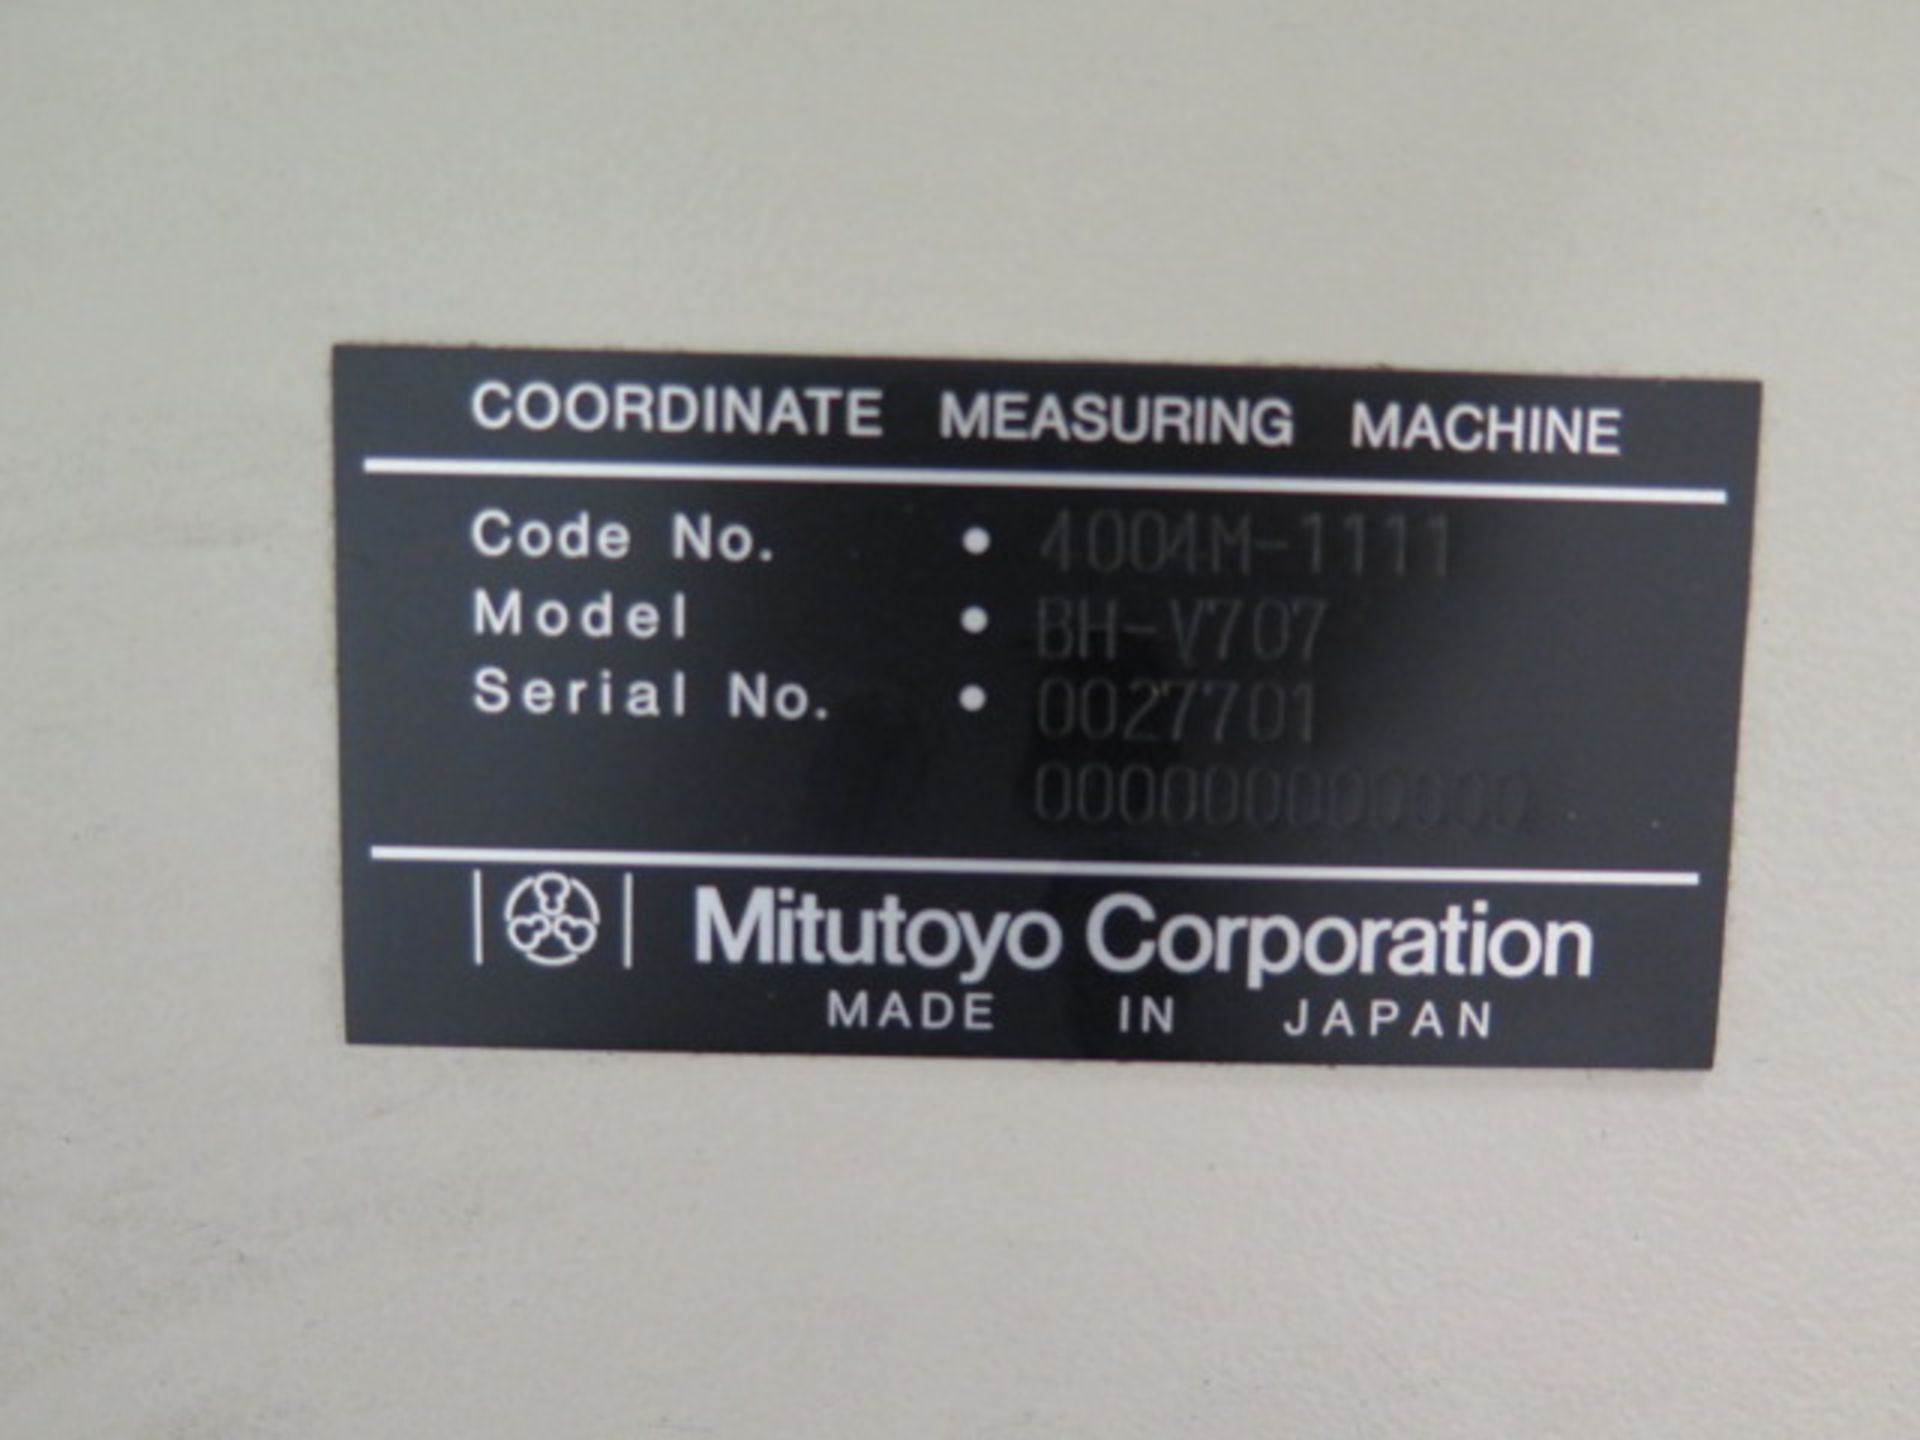 Mitutoyo “Bright-M” BTR-M707 CMM s/n 0027701 e/ Renishaw MH-8 Probe Head,27.75” x 27.75”, SOLD AS IS - Image 15 of 15